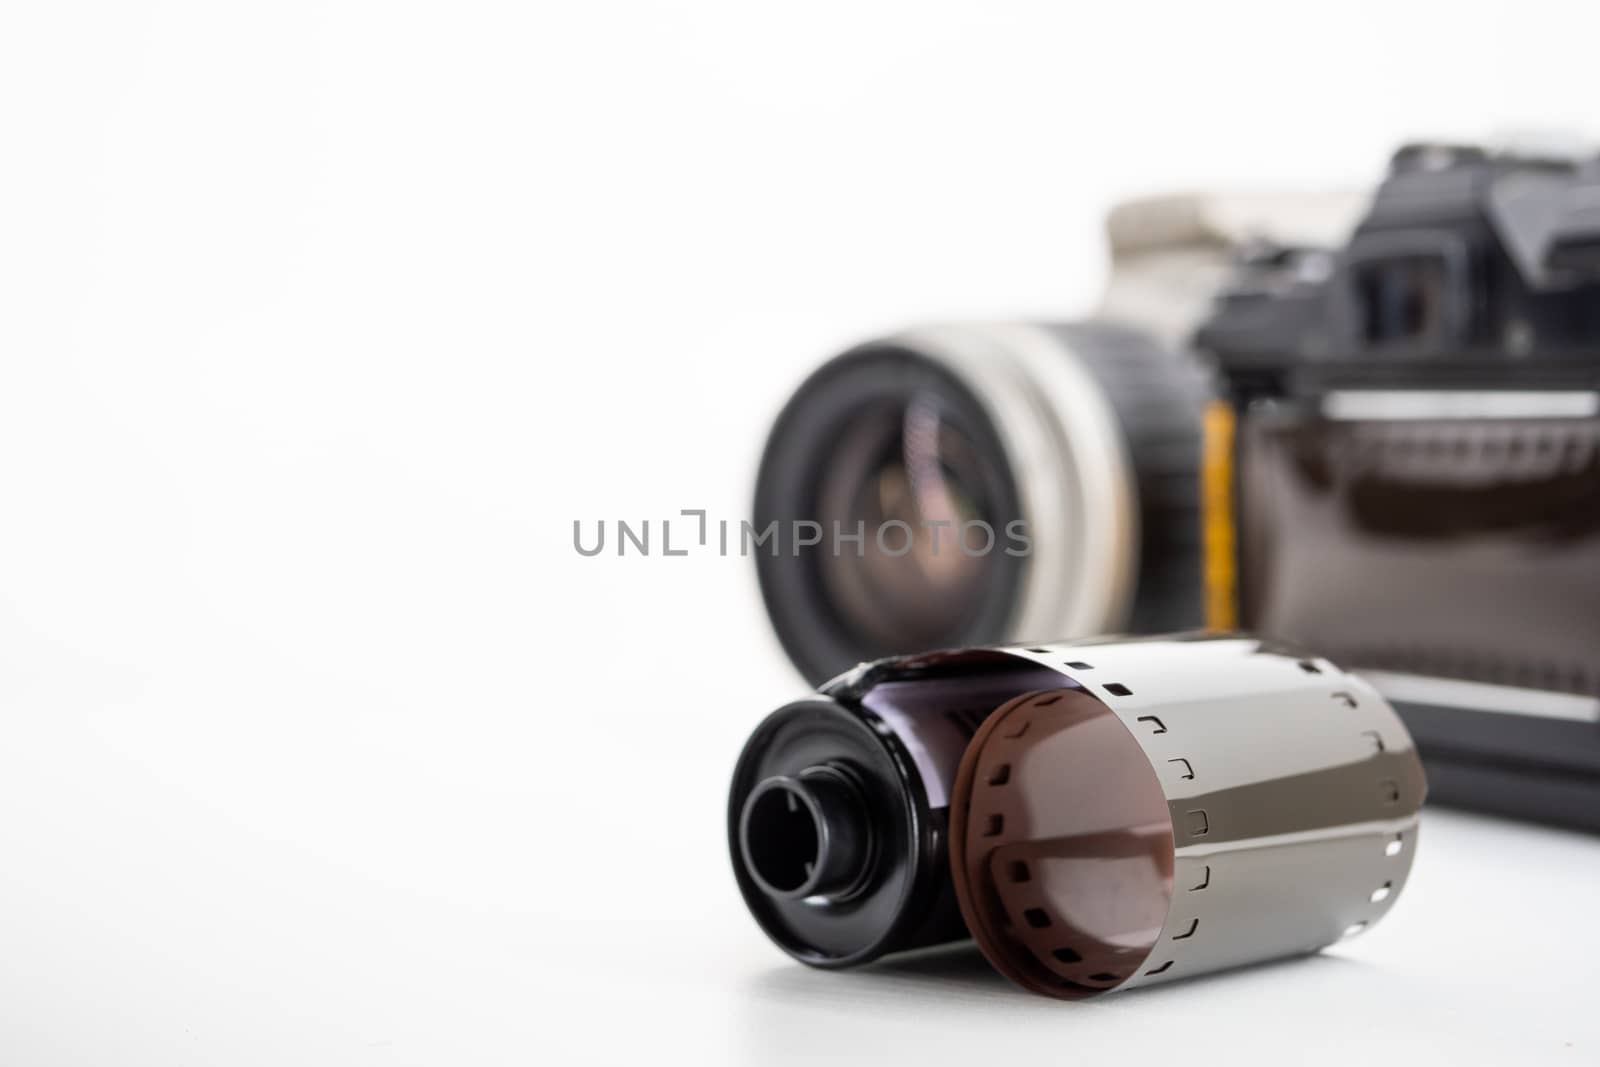 Single lens reflex cameras and film rolls on a white background.